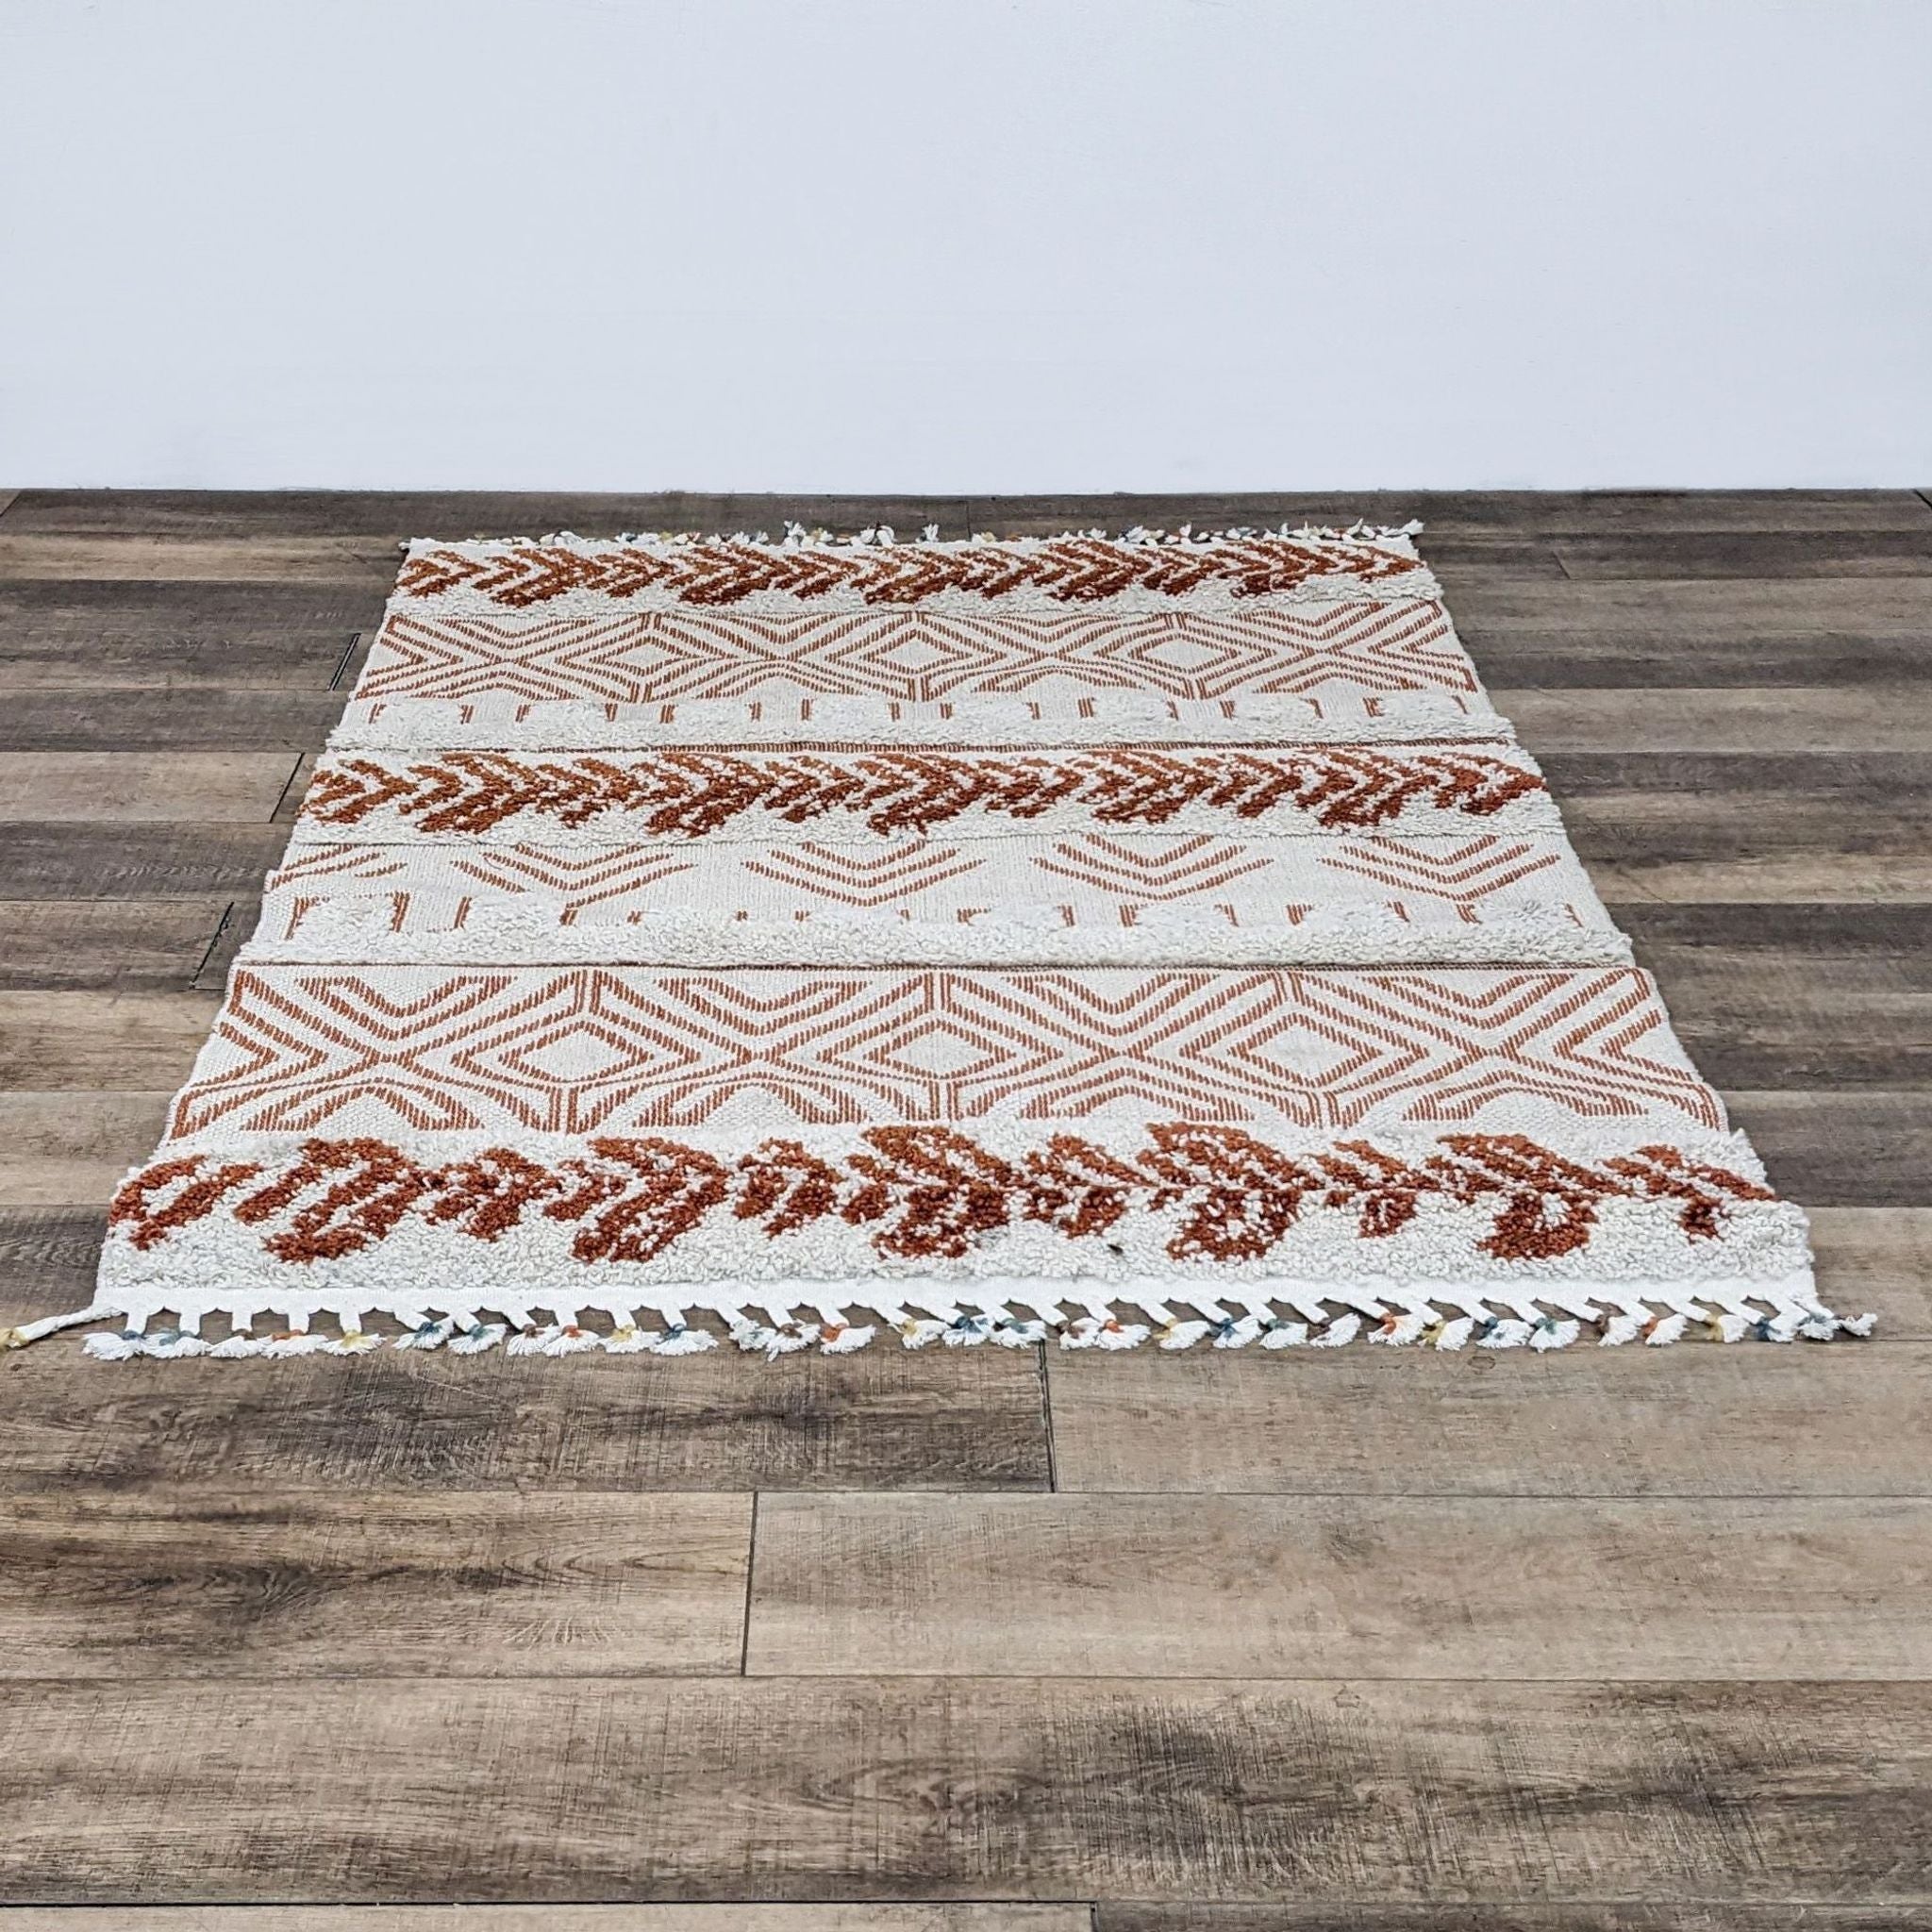 Alt text 1: nuLOOM's Altos area rug displayed on a wooden floor, showcasing a tribal pattern with tassels on the ends.